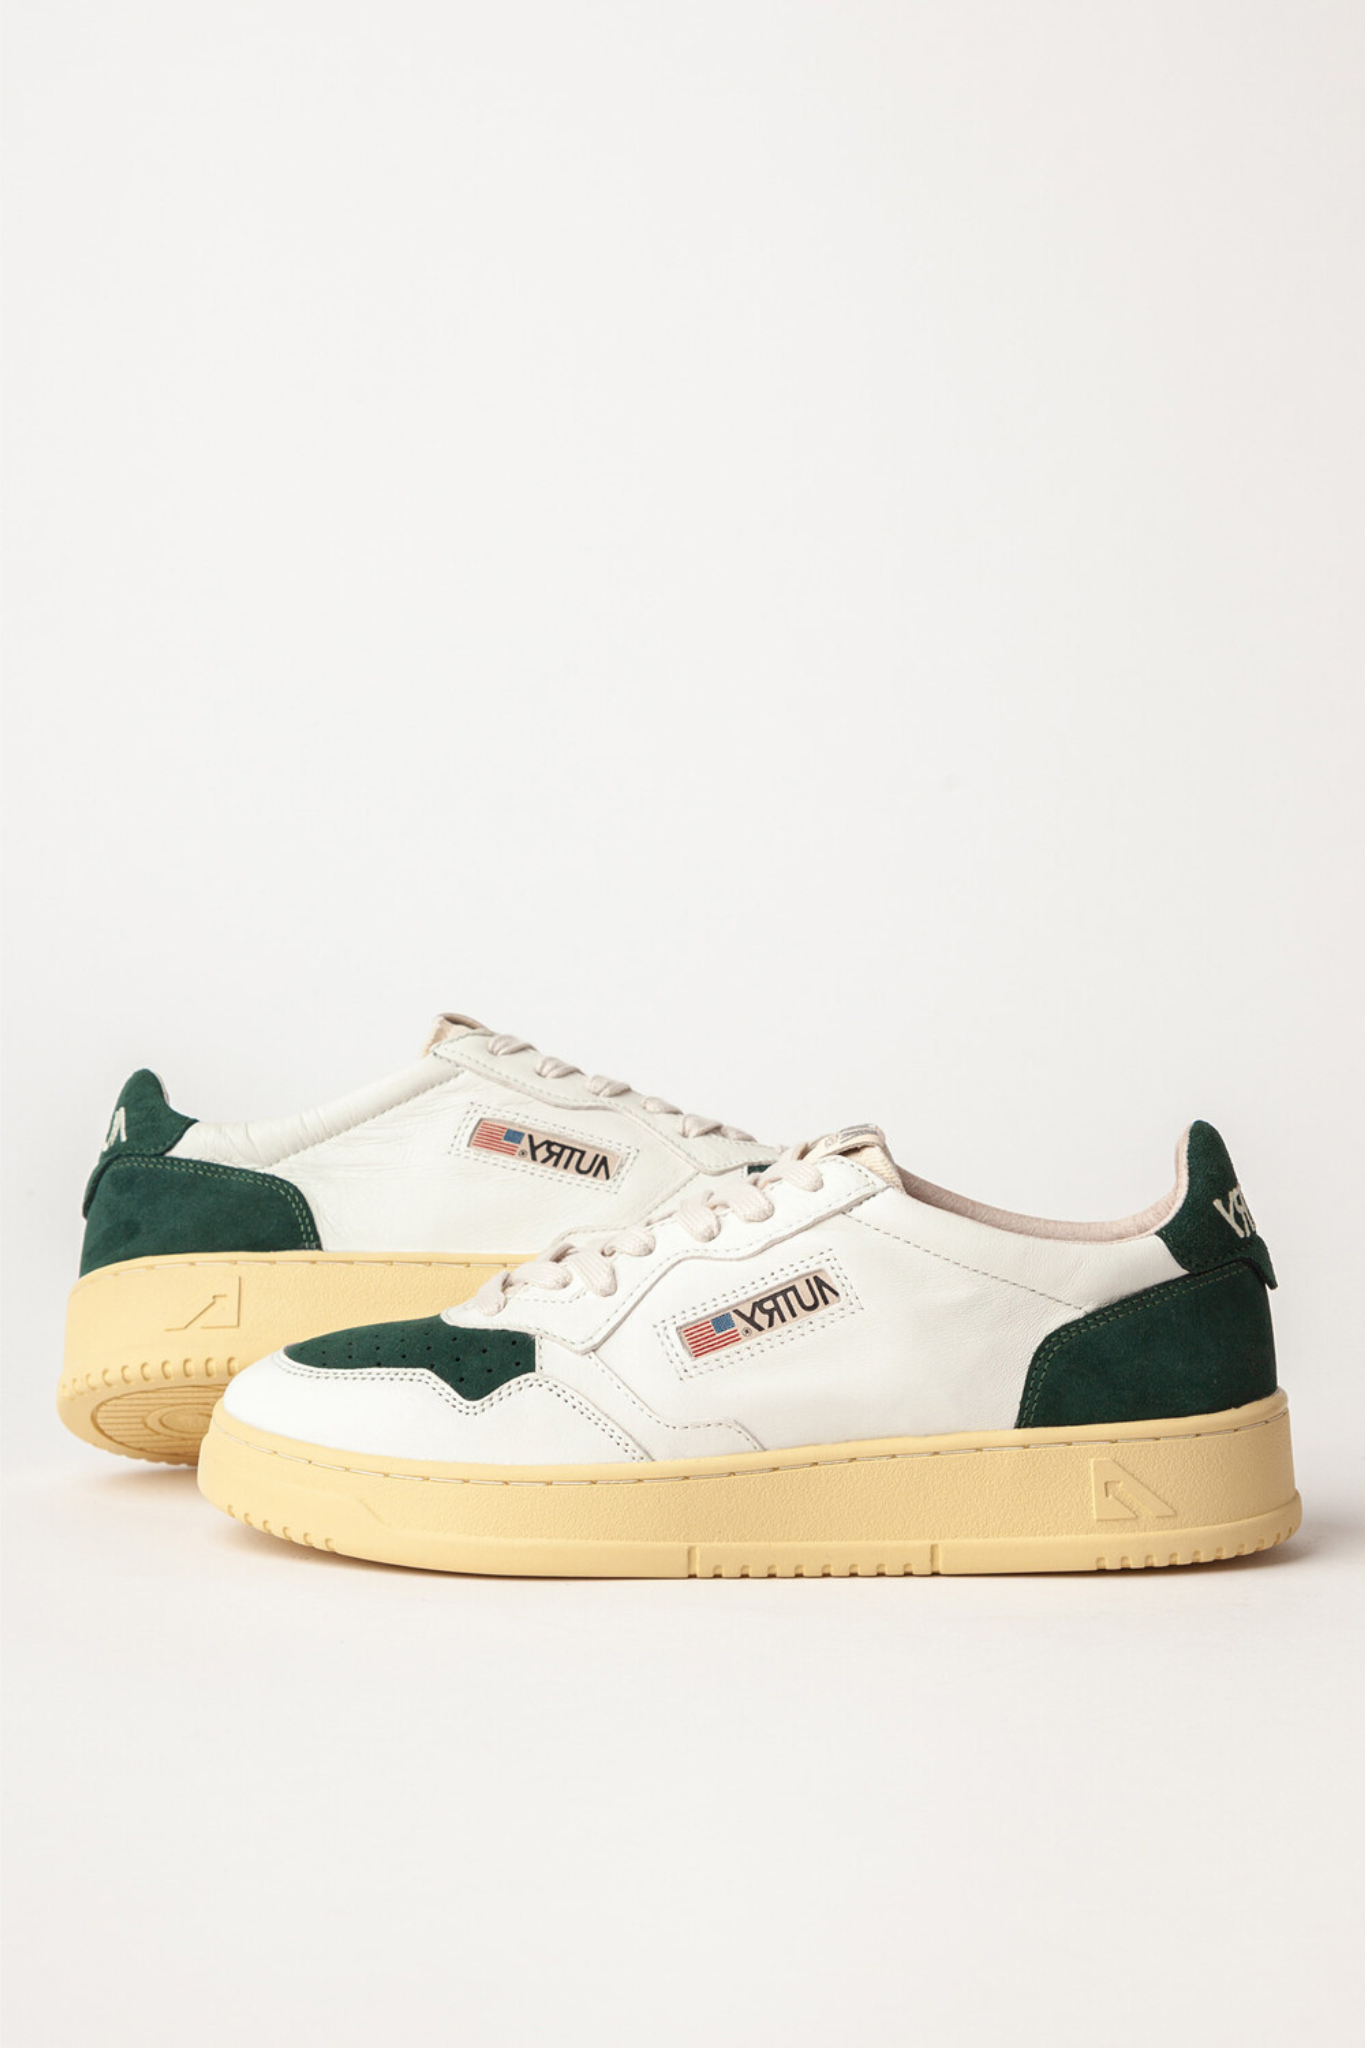 AULW-SL09 - MEDALIST LOW  SNEAKERS IN WHITE LEATHER AND BOTTLE